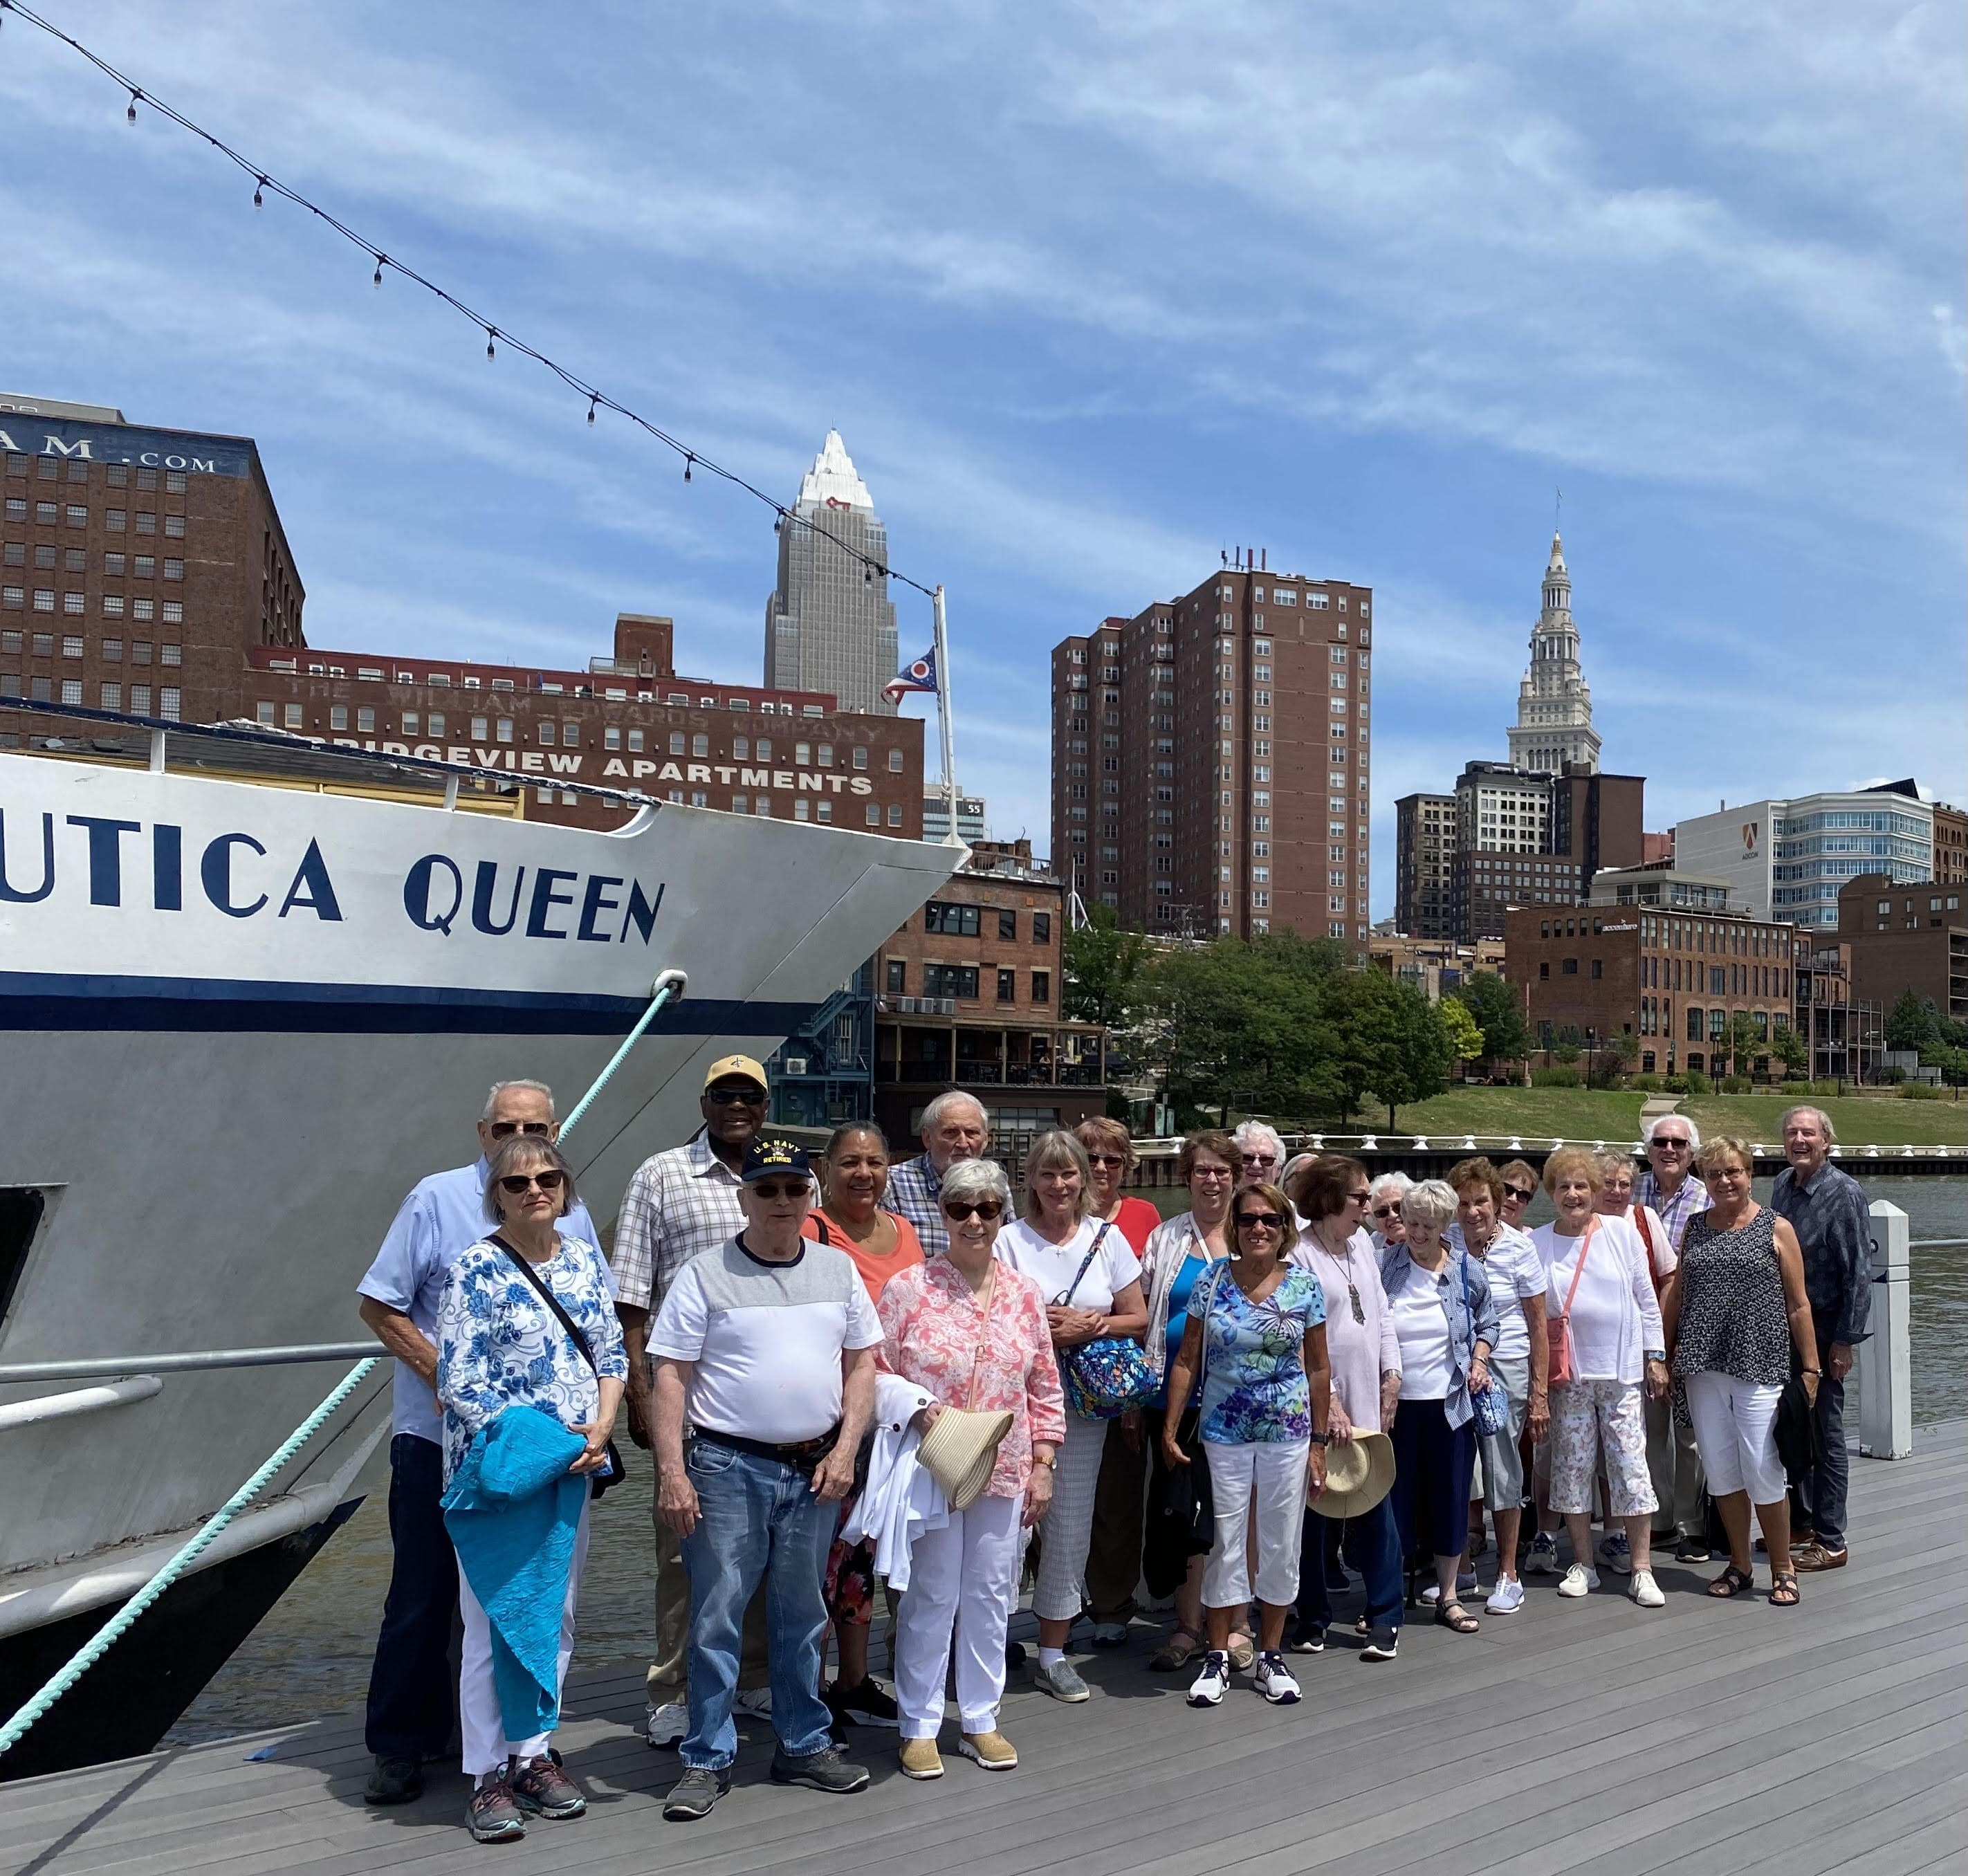 Nautica Queen boat ride on Lake Erie in Cleveland, Ohio